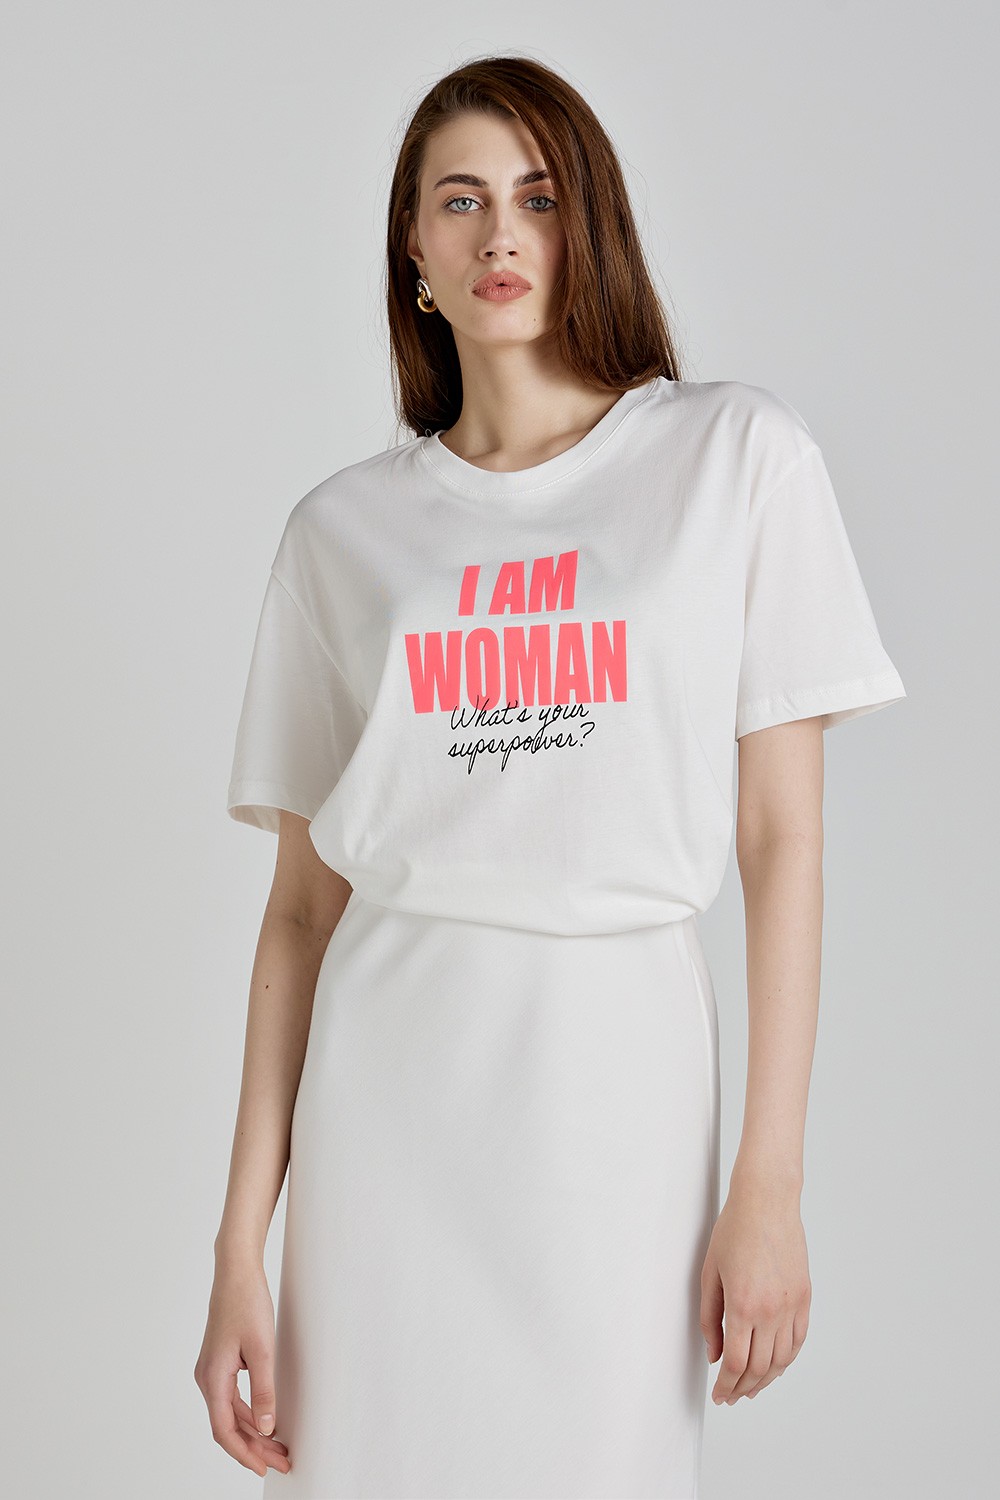 I Am a Woman - Women's day Campaign